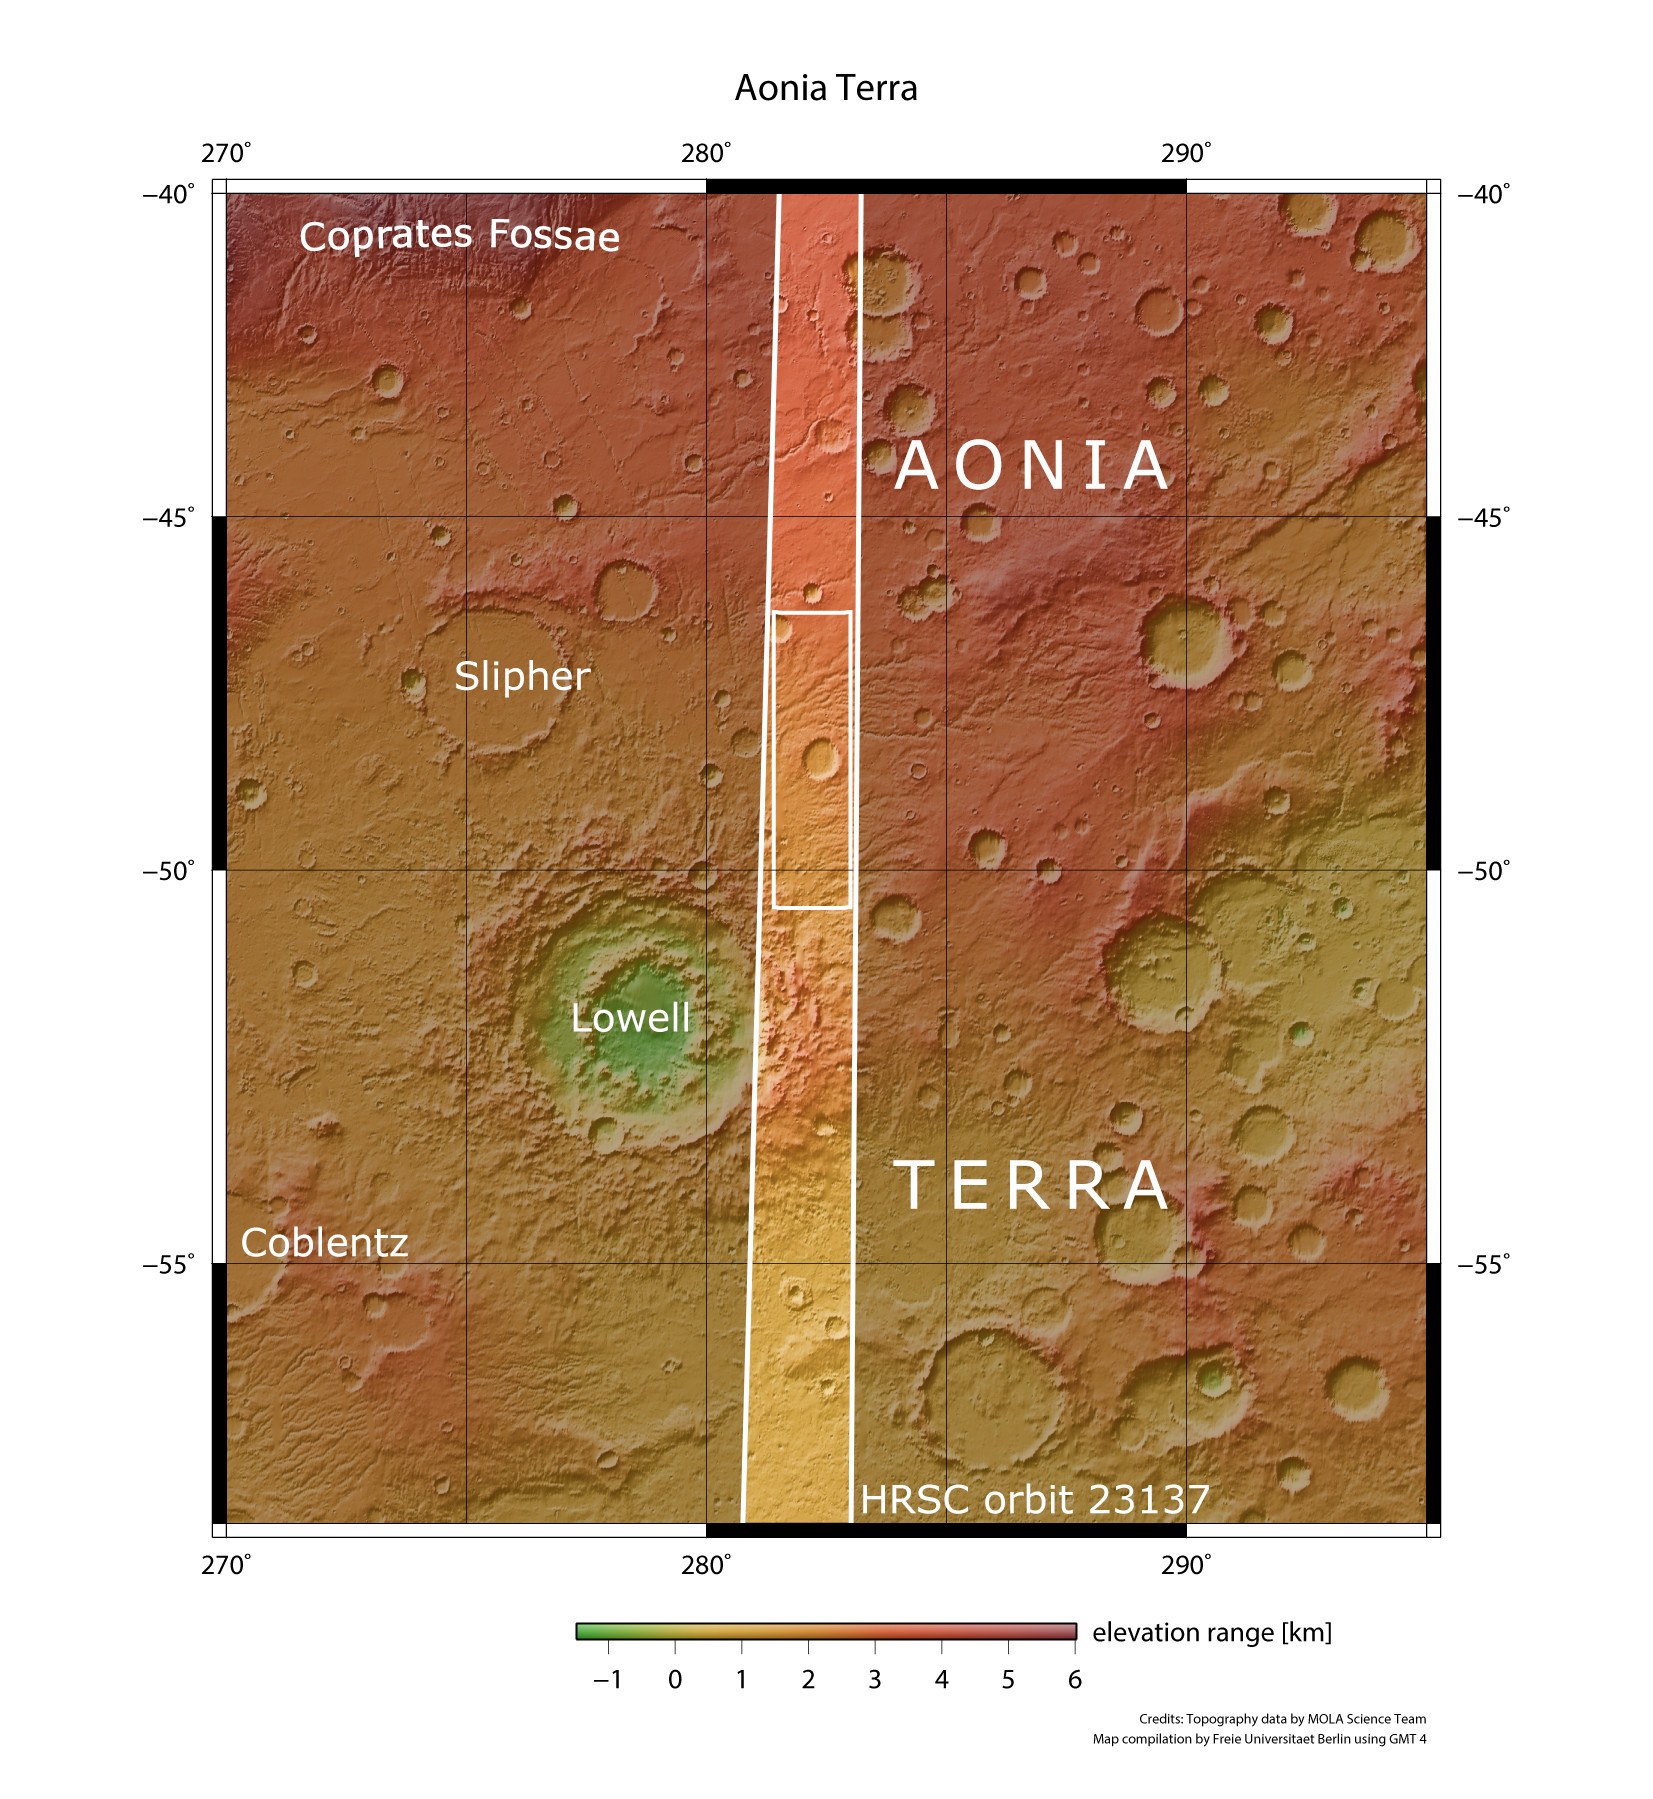 The ancient highland region of Aonia Terra in southern Mars